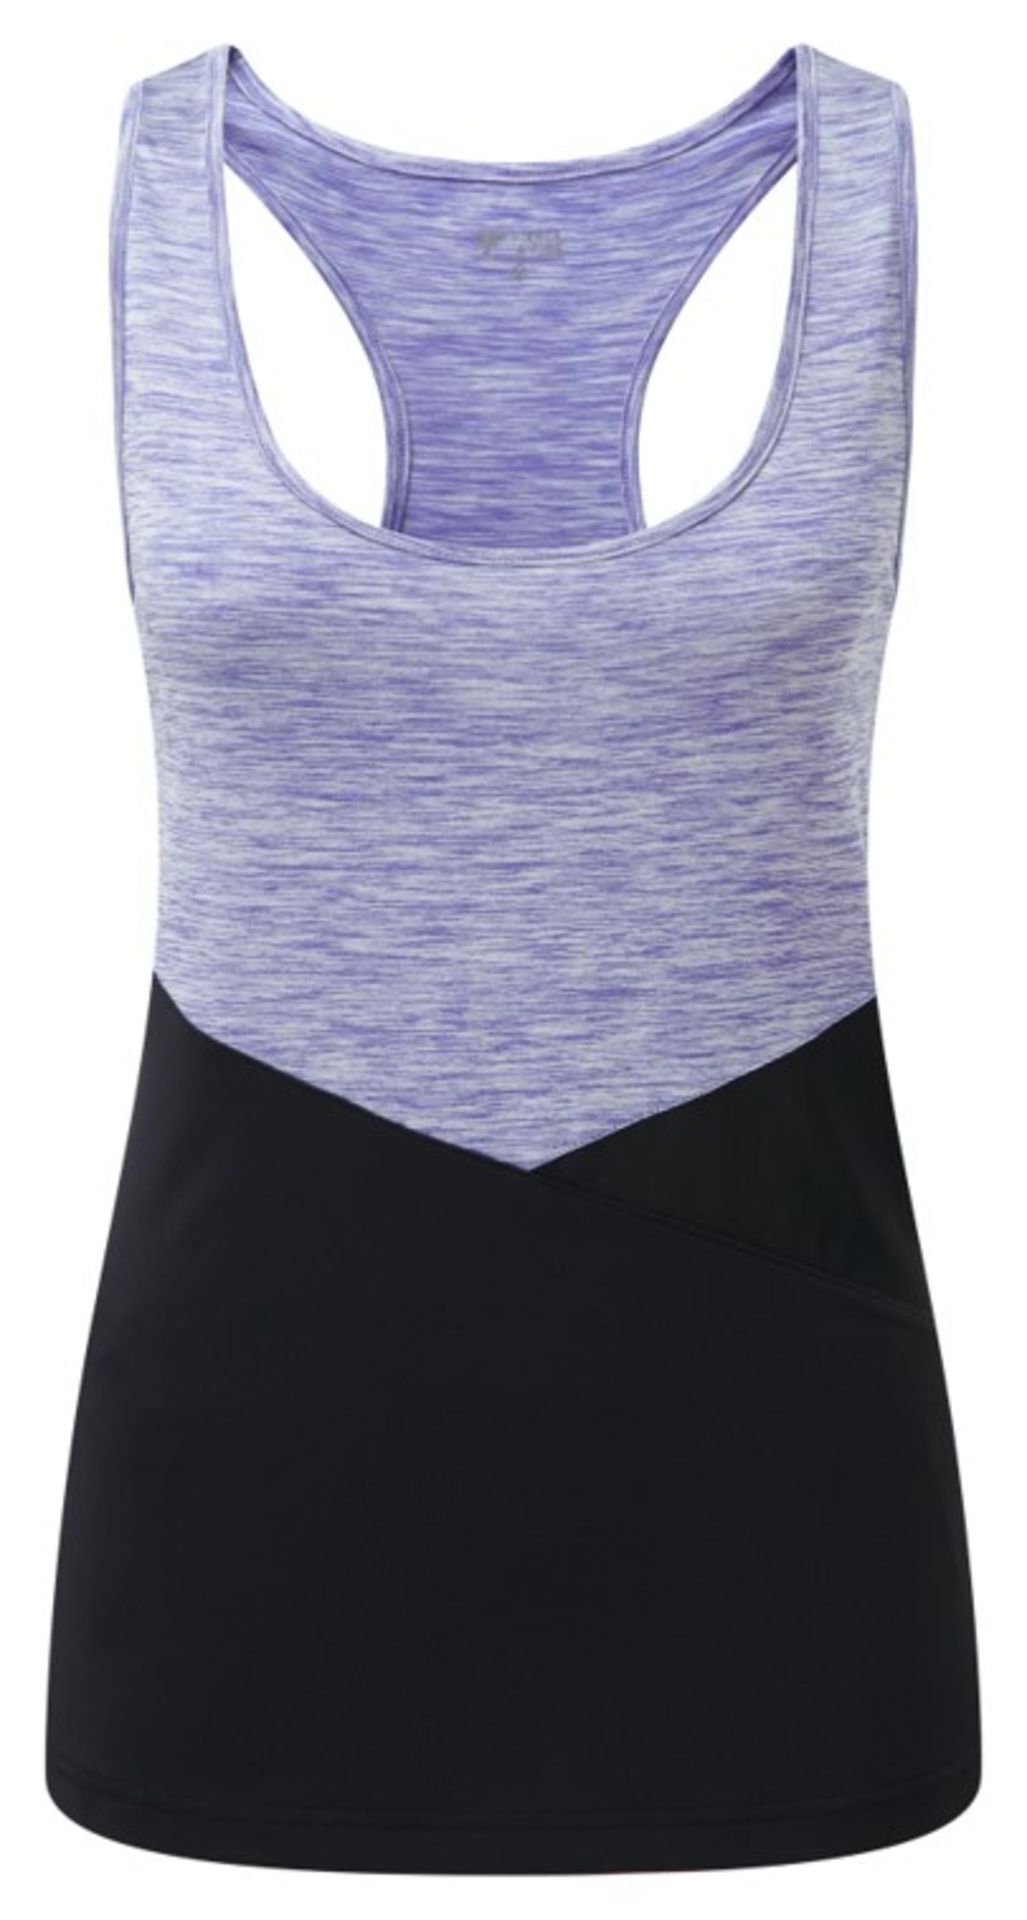 Liquidation of A Premium Gymwear Clothing Brand - 3,034 Items RRP £83,283.30. Huge variety of sizes, - Image 11 of 11